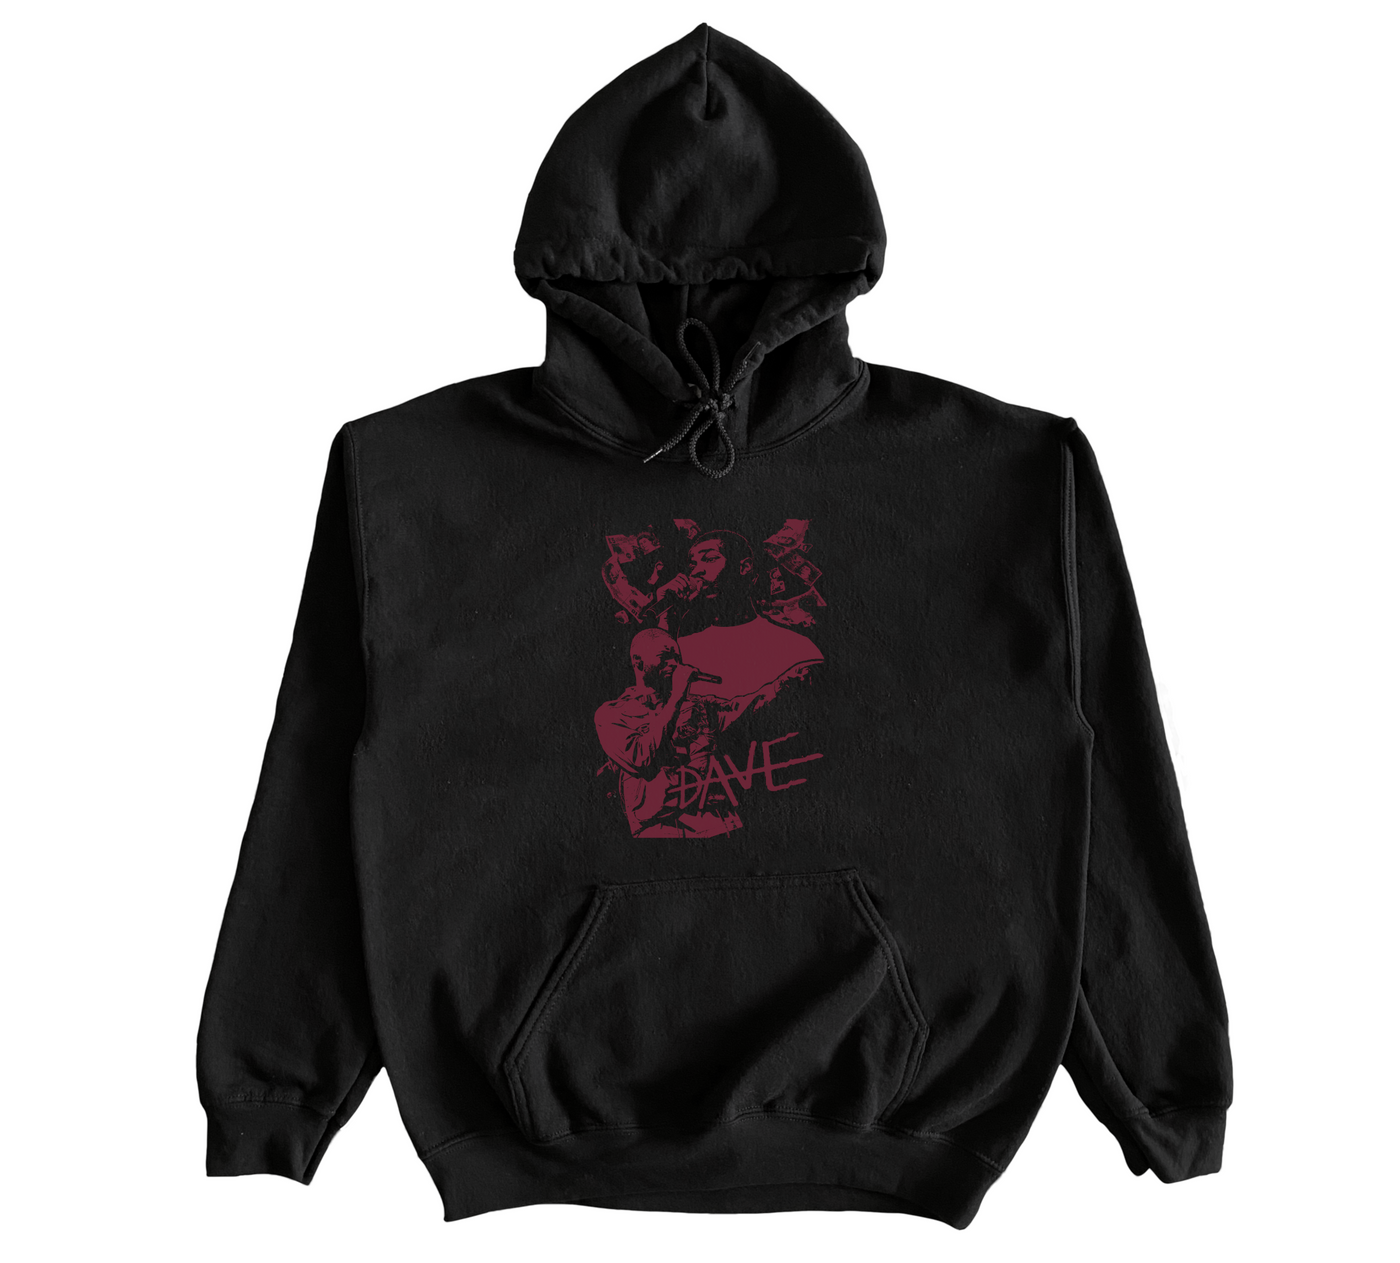 Dave Silhouette Hoodie